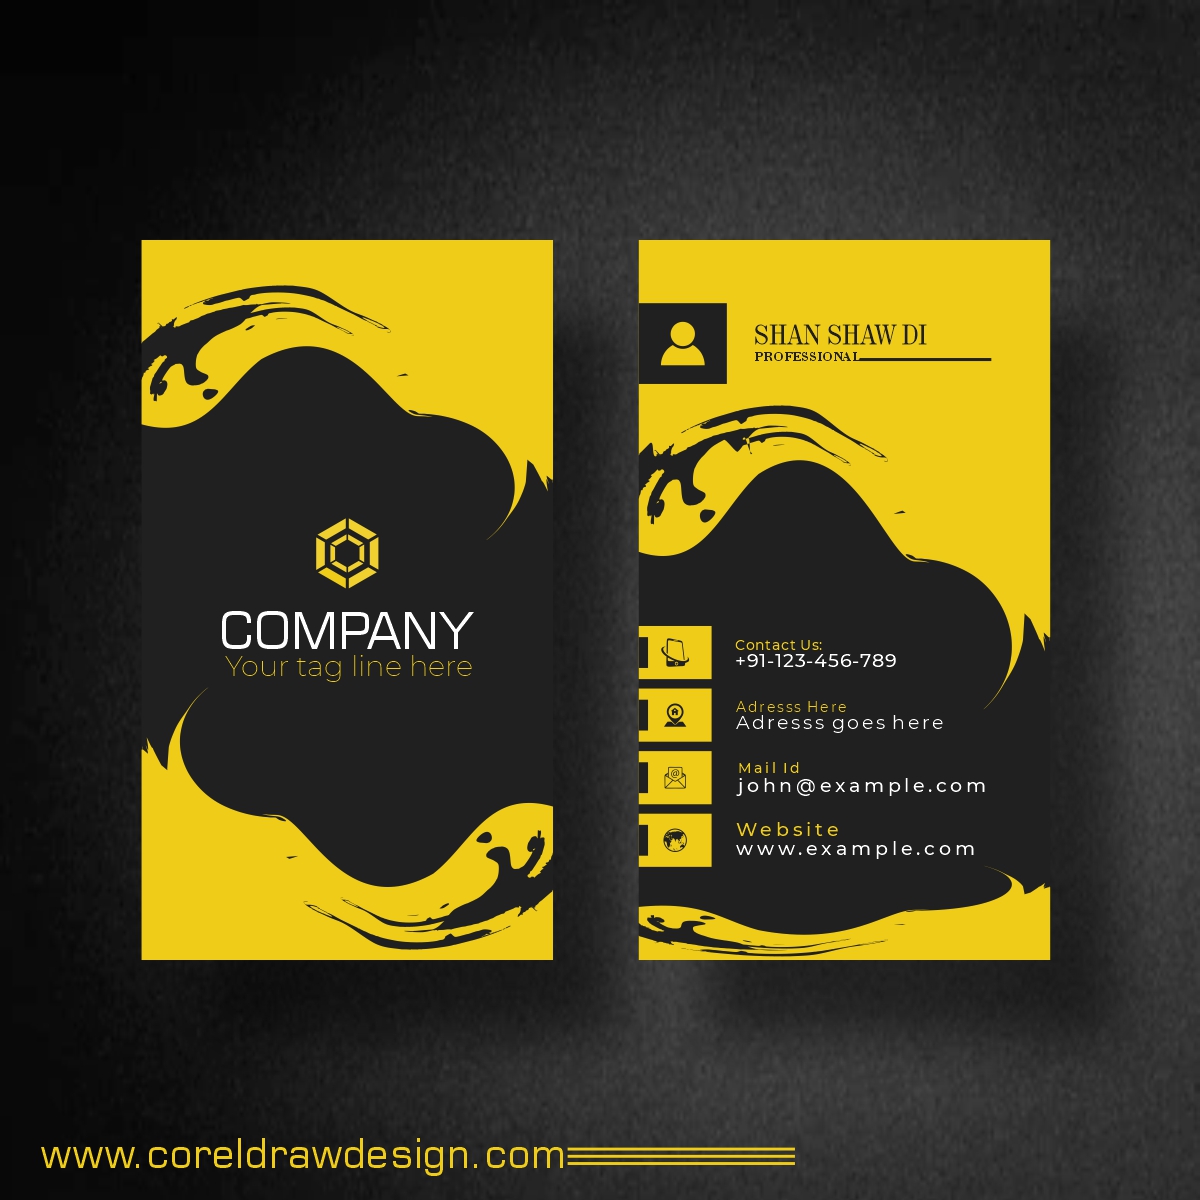 Download Stylish Business Card Design Free Vector  CorelDraw Throughout Professional Business Card Templates Free Download